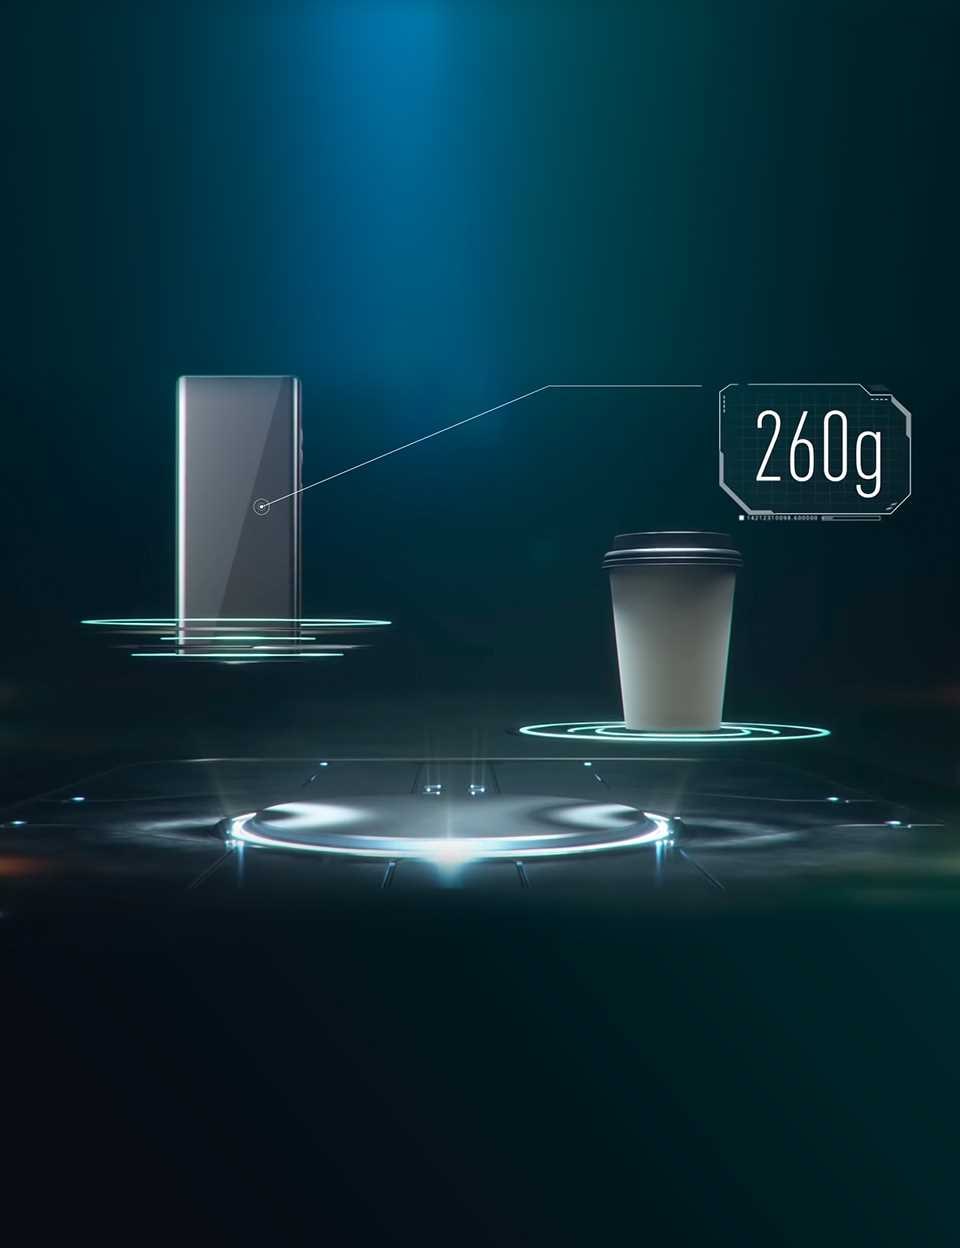 A visual showing that the LG WING lighter than a 260 gram coffee